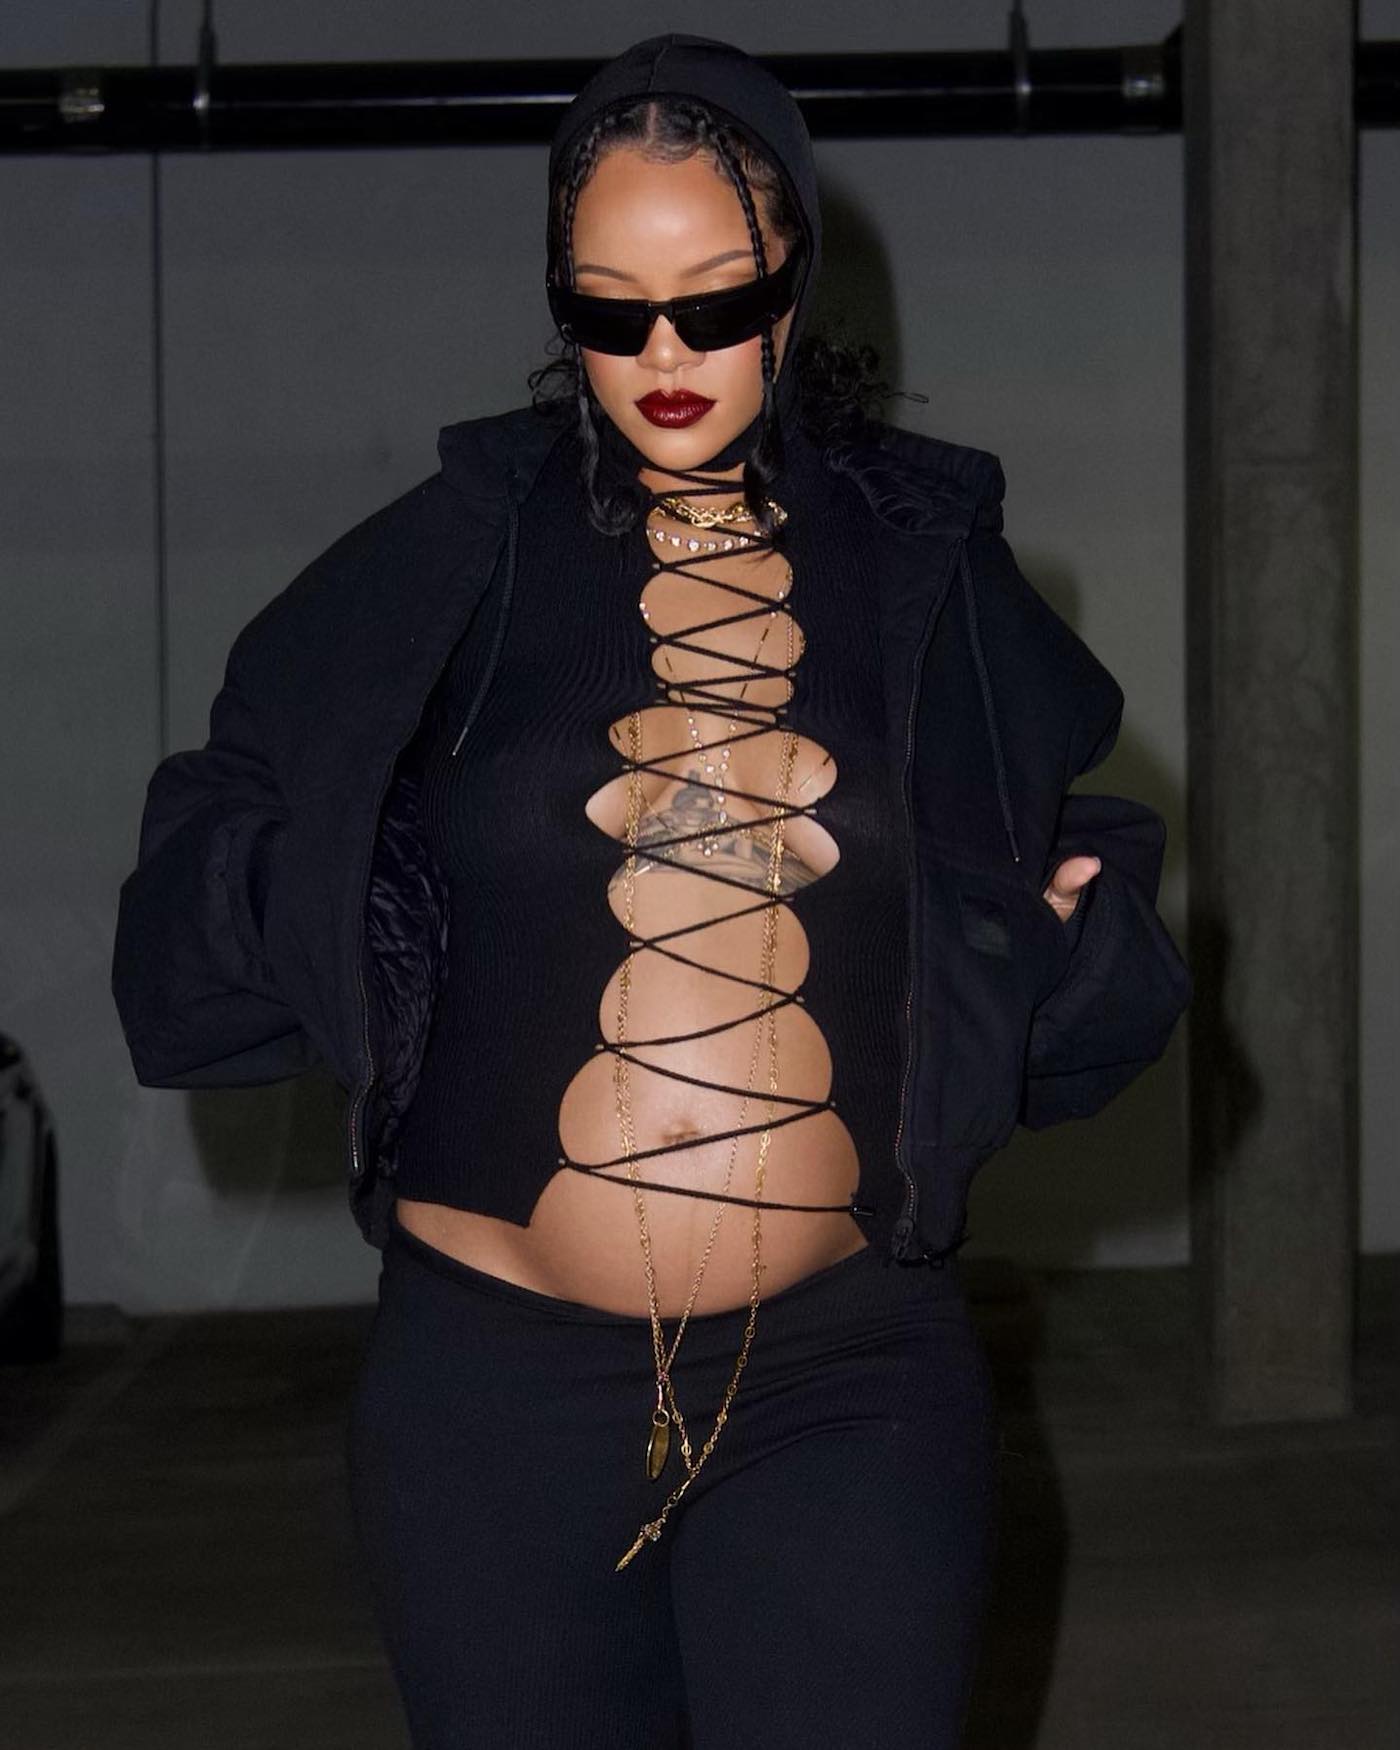 Pregnant Rihanna Shows Off Her Baby Bump In Lace-Up Top Outfit 4